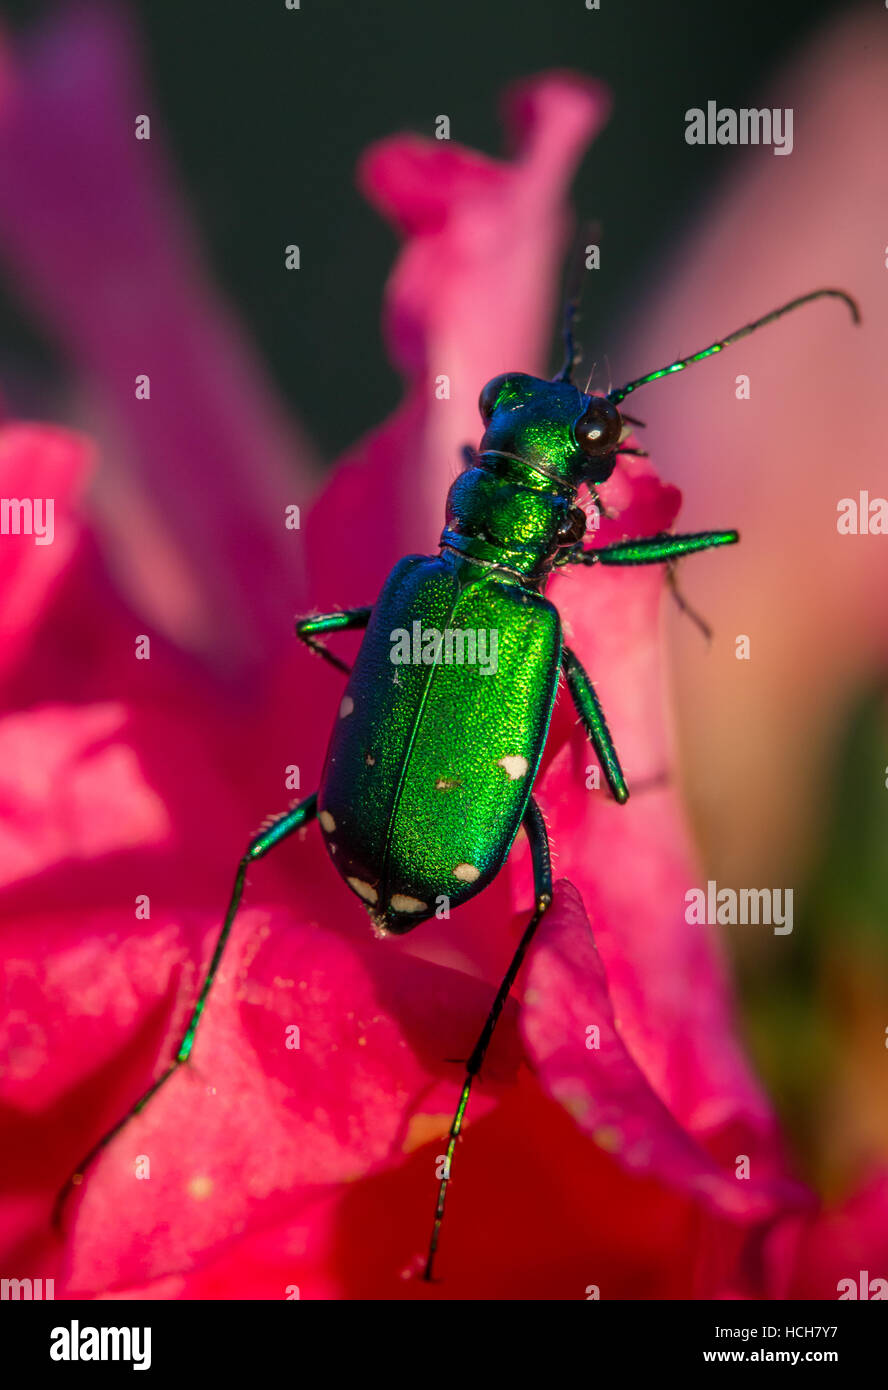 Six spotted tiger beetle with metallic green body on pink flower petals Stock Photo